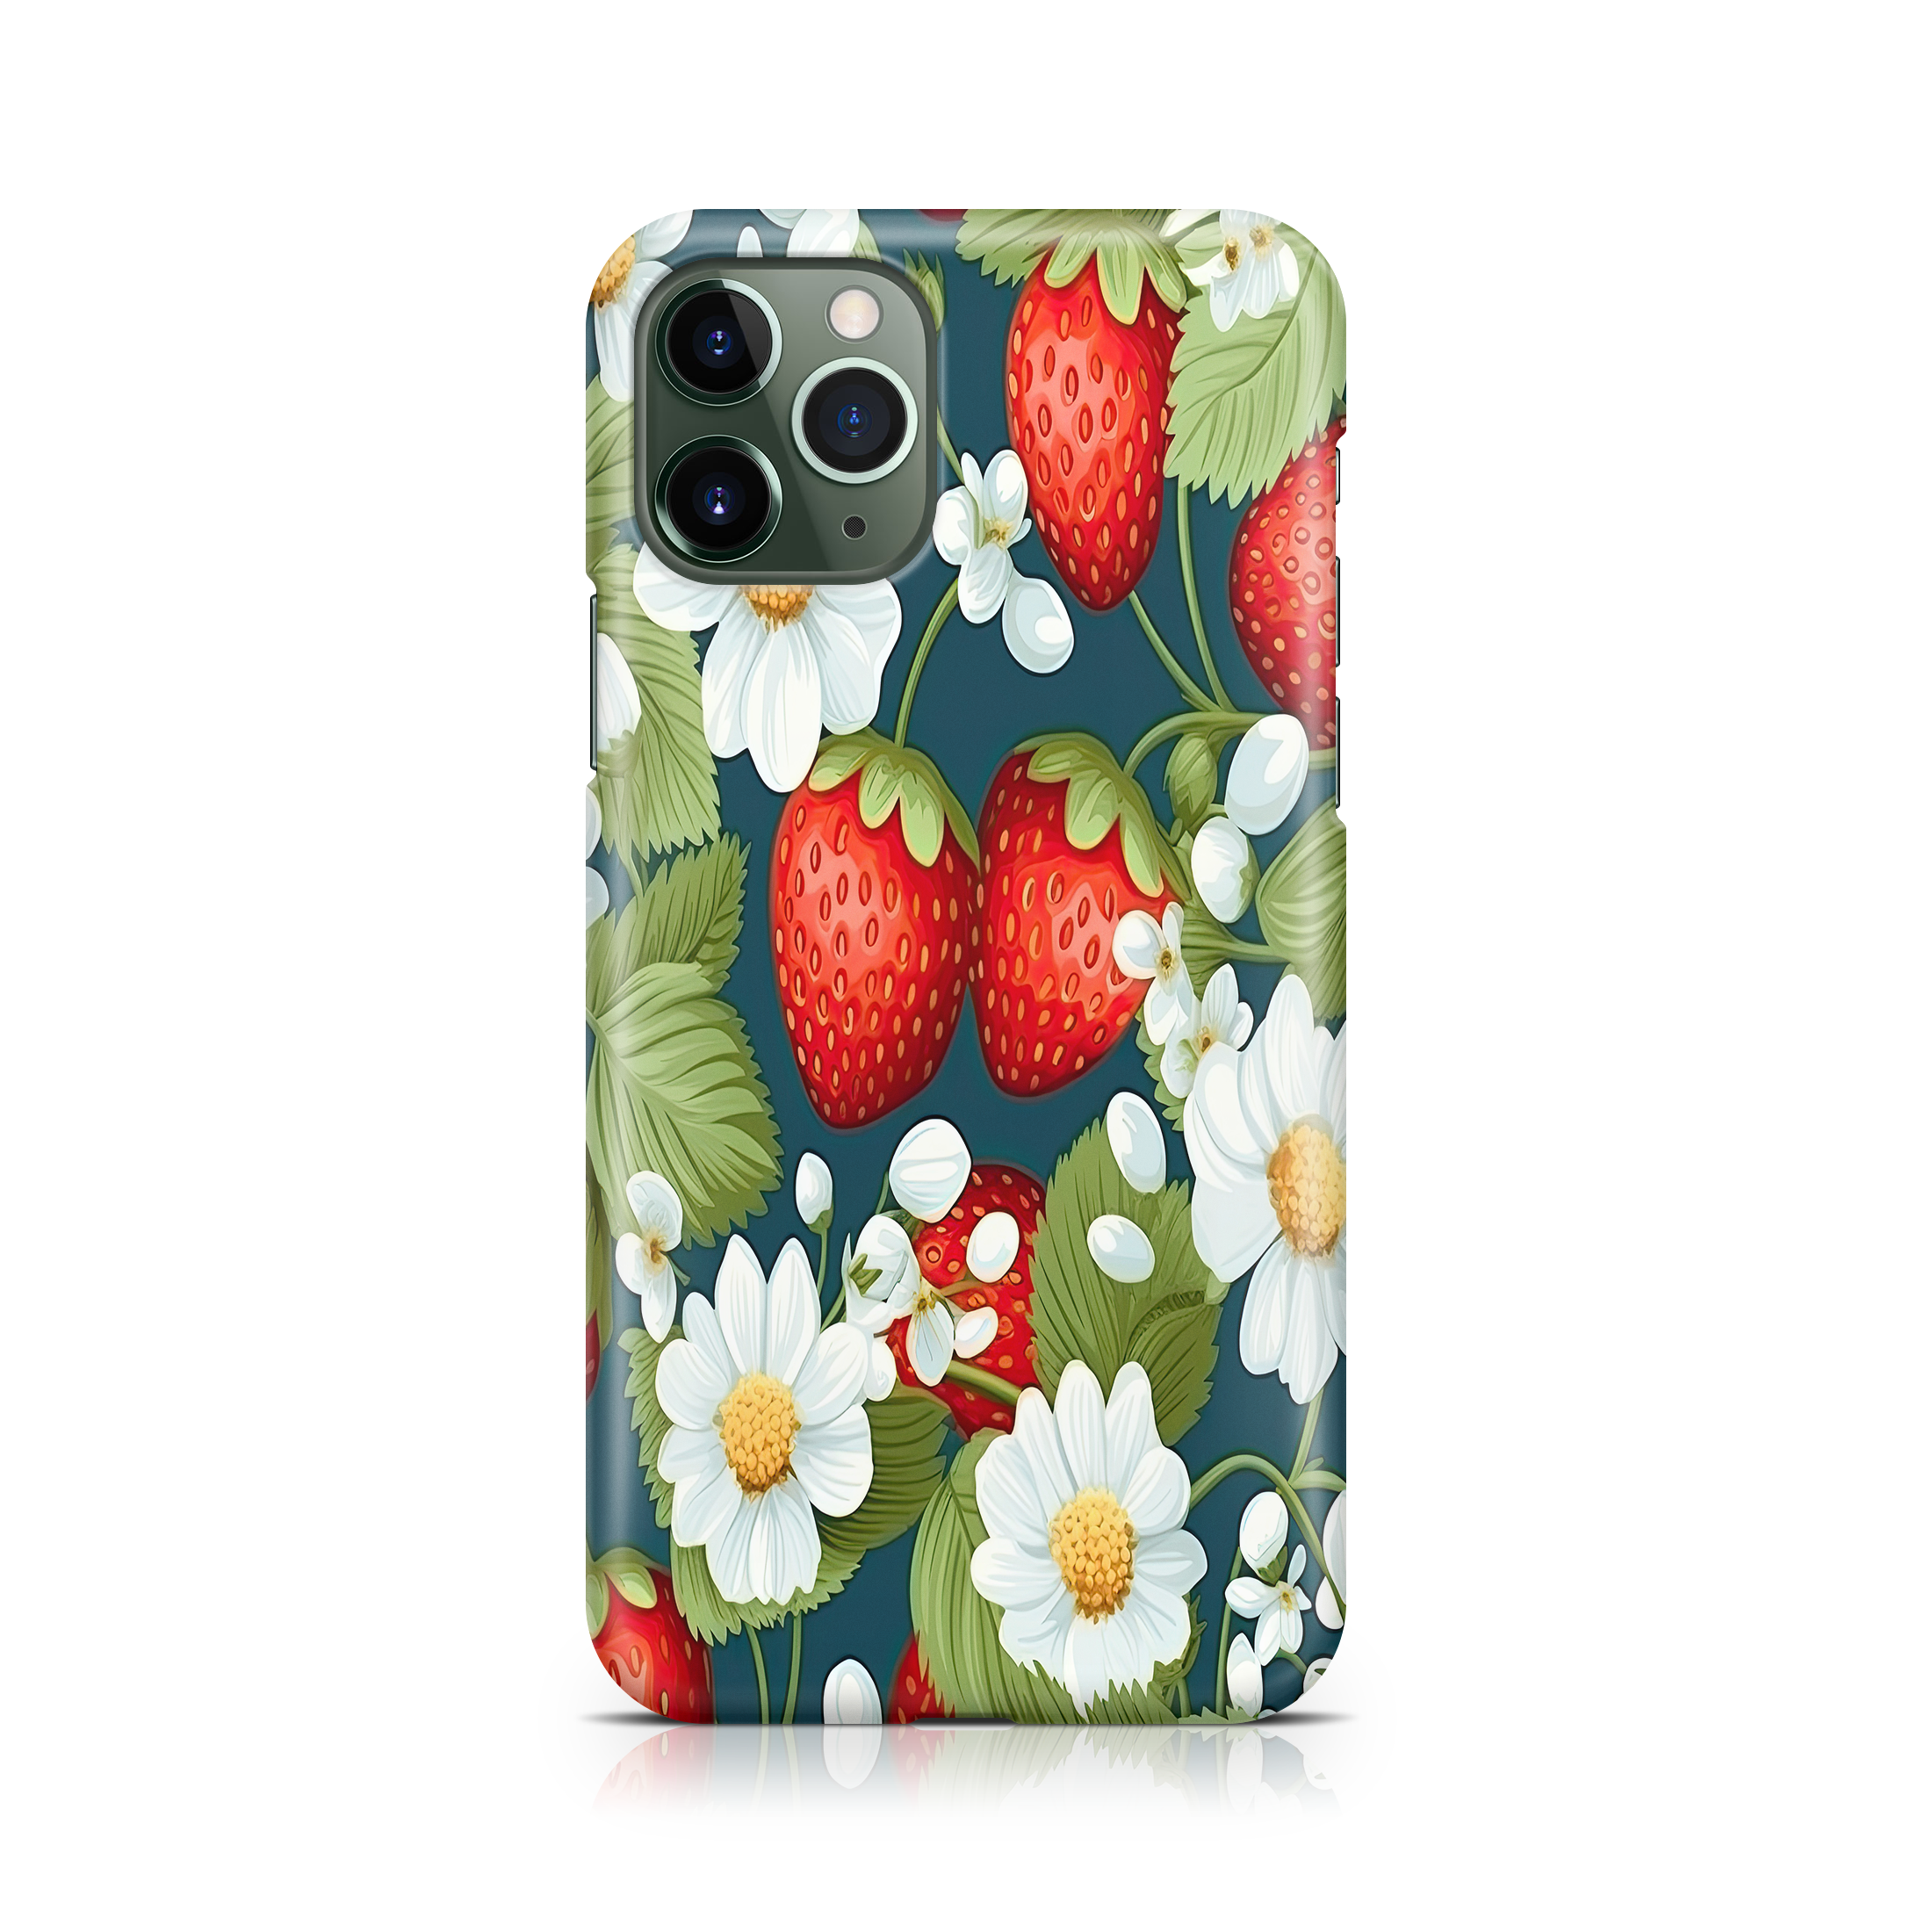 Strawberry Vine Oasis - iPhone phone case designs by CaseSwagger